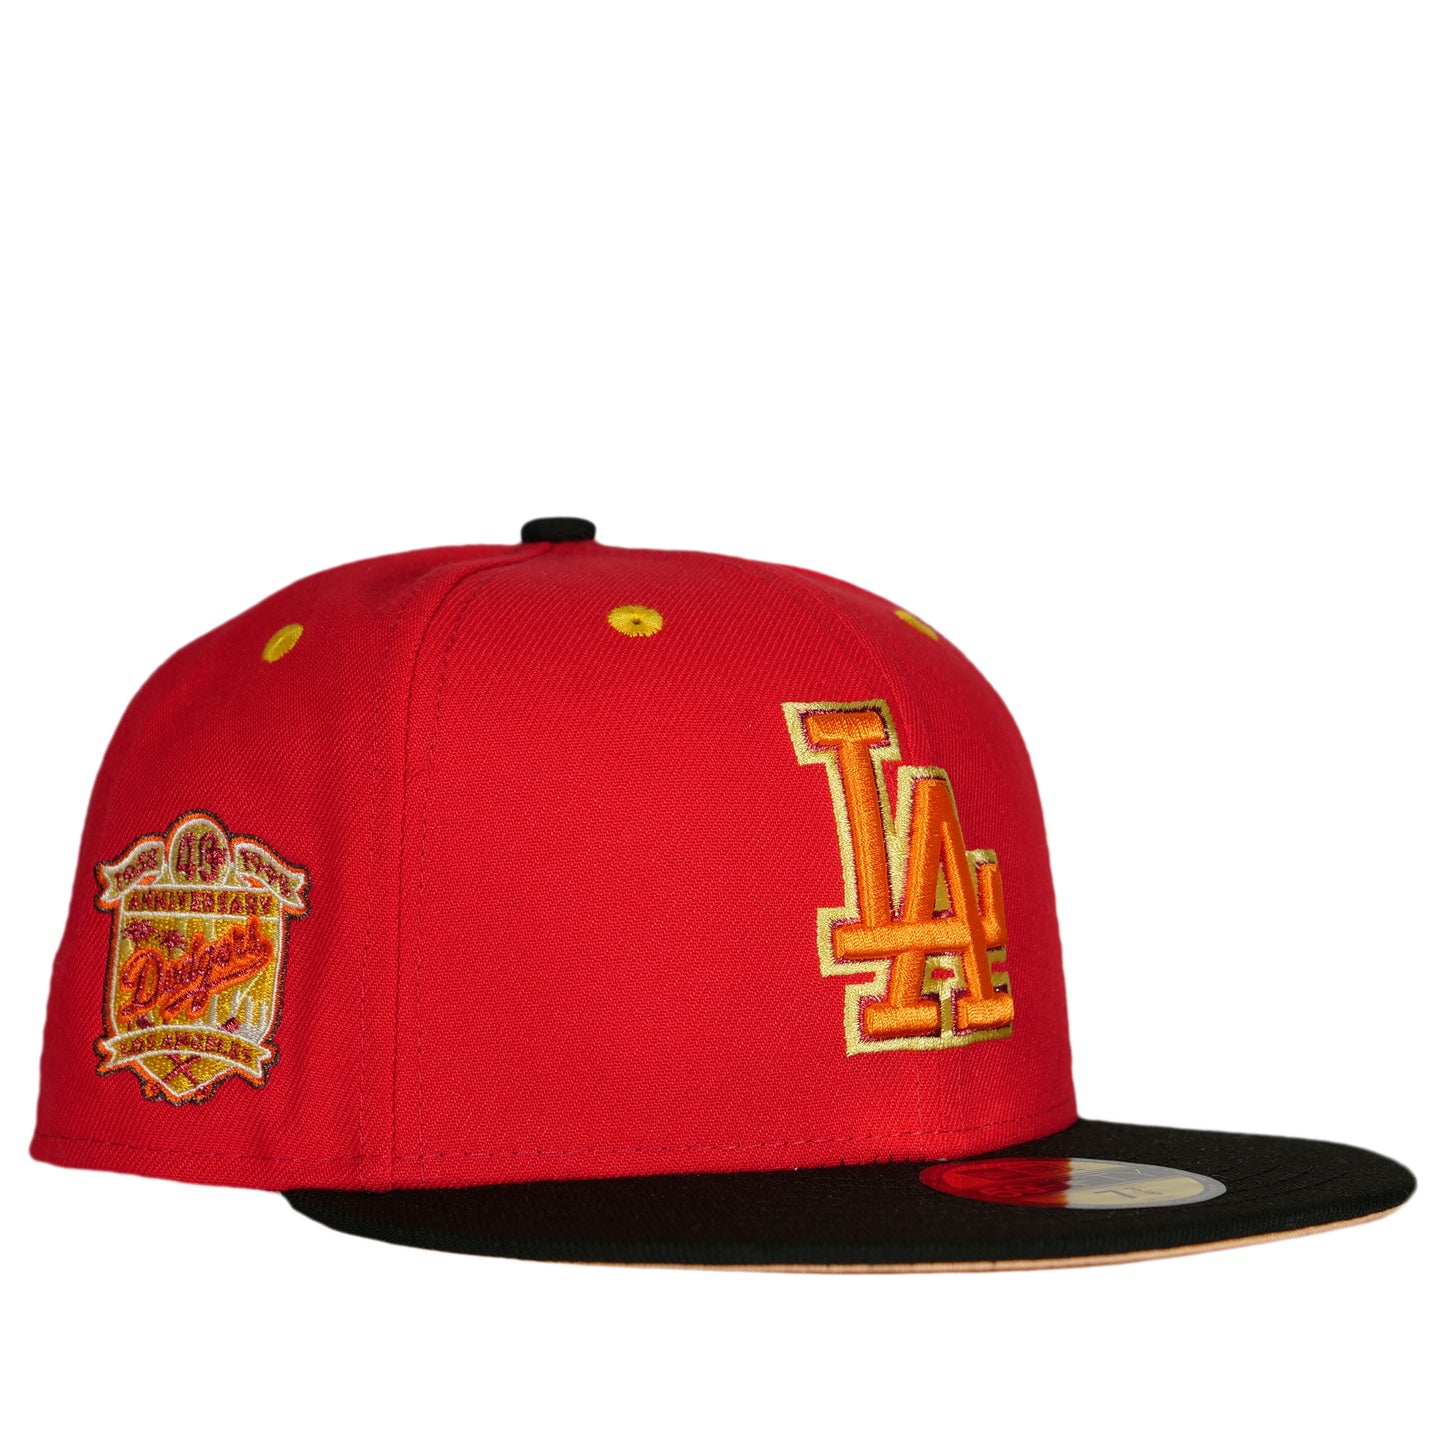 New Era Los Angeles Dodgers 59Fifty Fitted Hat - Red/ Black/ Orange ...